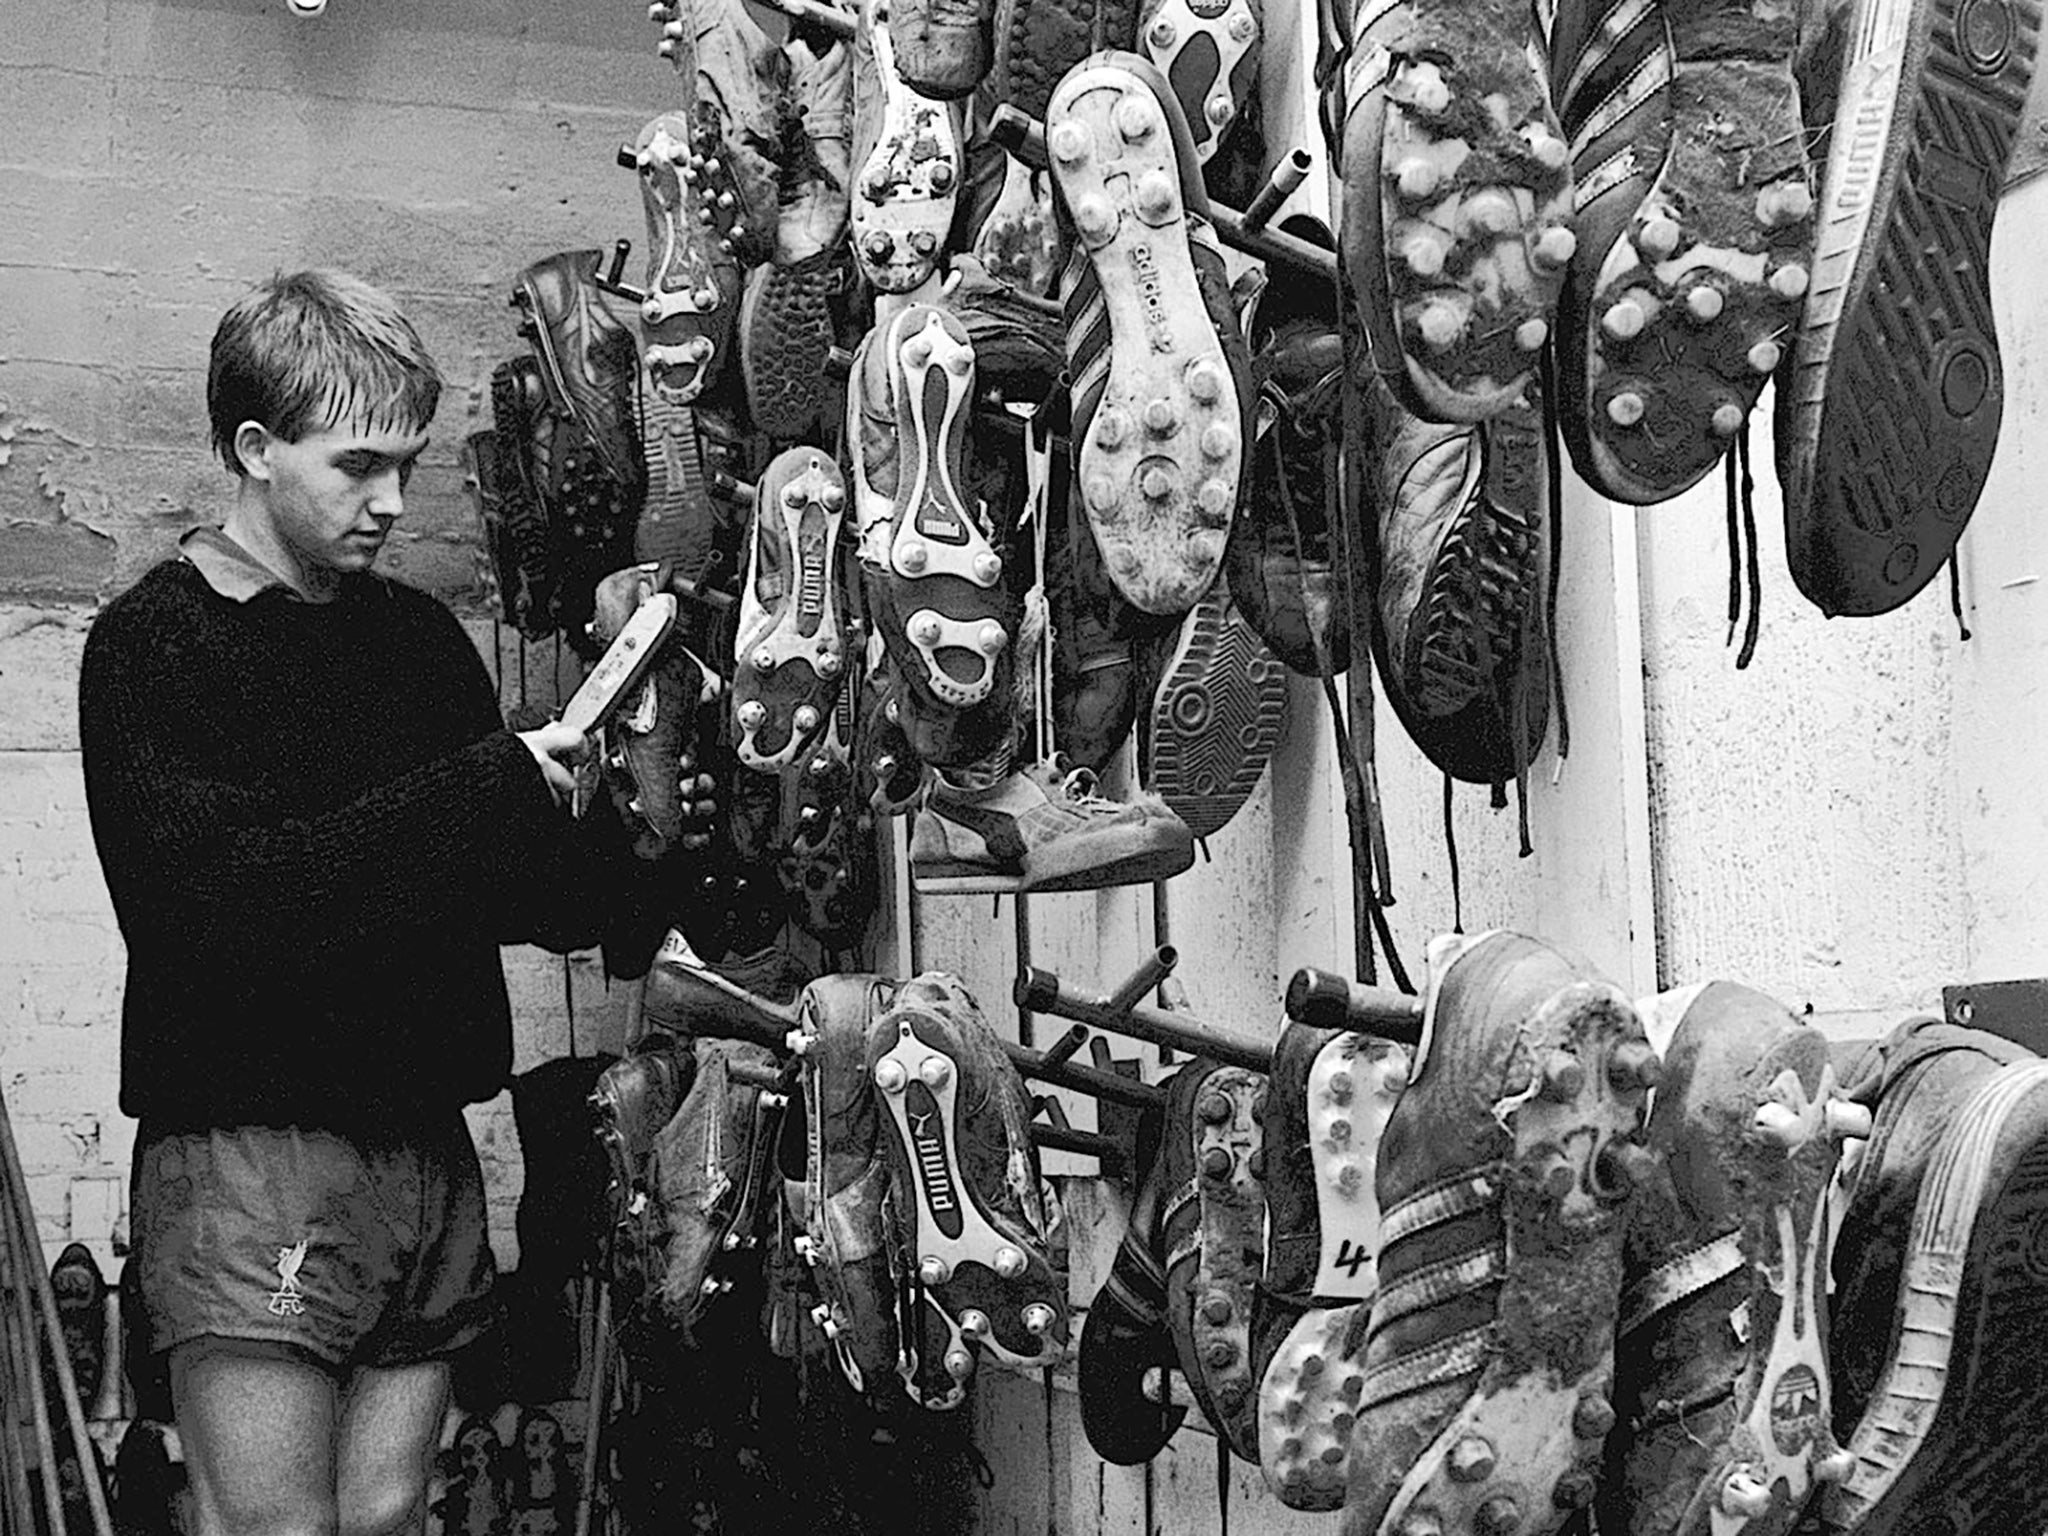 Liverpool youngster Mick Halsall cleans the boots at Anfield in 1983